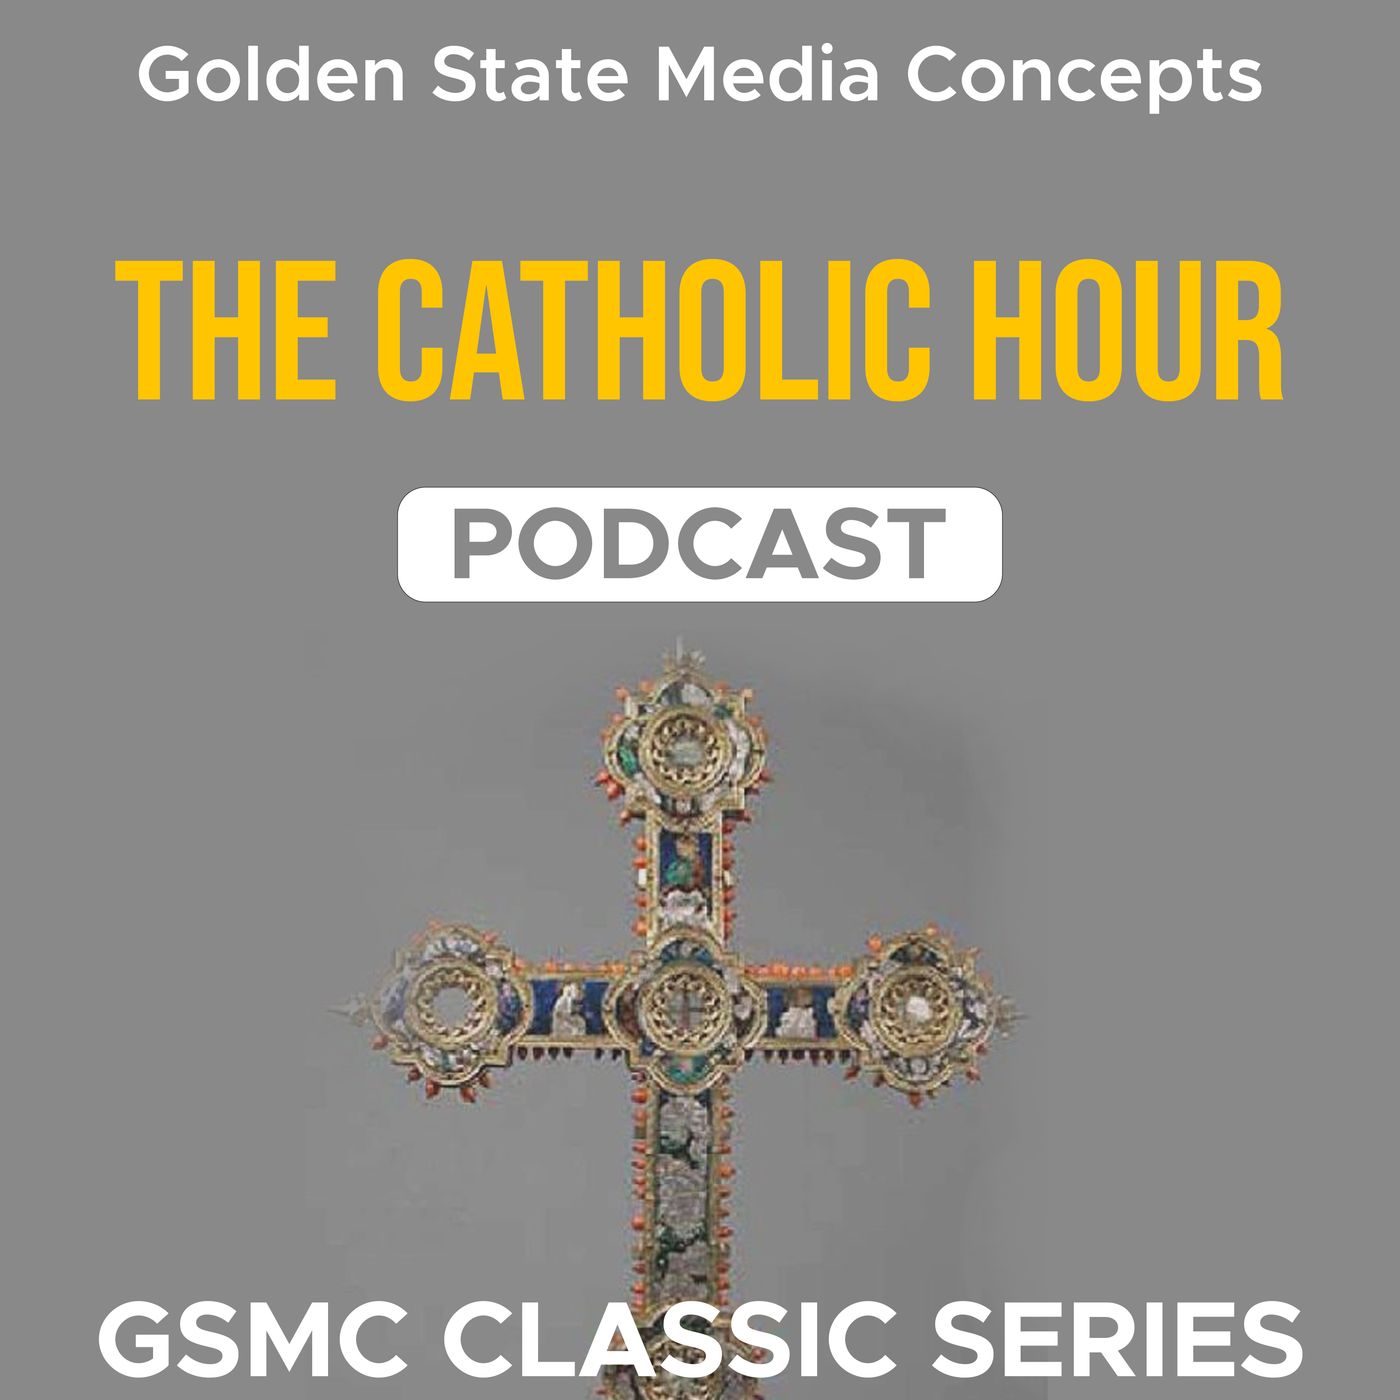 GSMC Classics: The Catholic Hour Episode 84: War As a Judgement From God